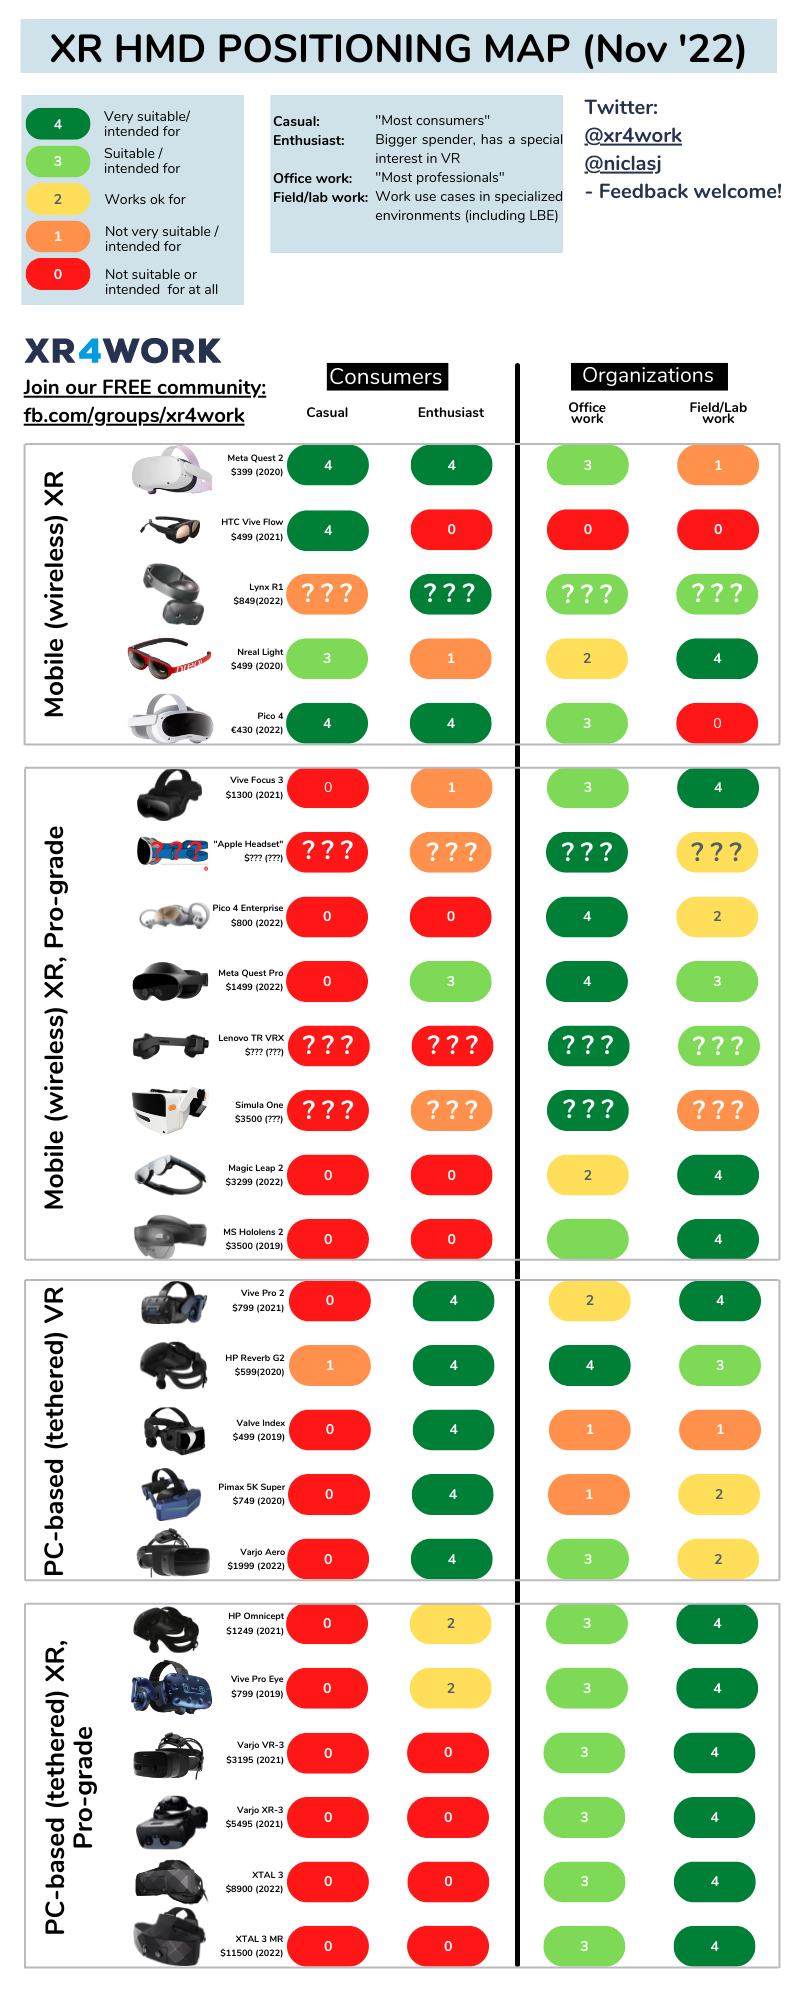 Infographic about VR, AR, MR headsets and market positioning: Including Quest 2, Vive Focus, Hololens, Magic Leap, HP Reverb G2, Valve Index, Varjo